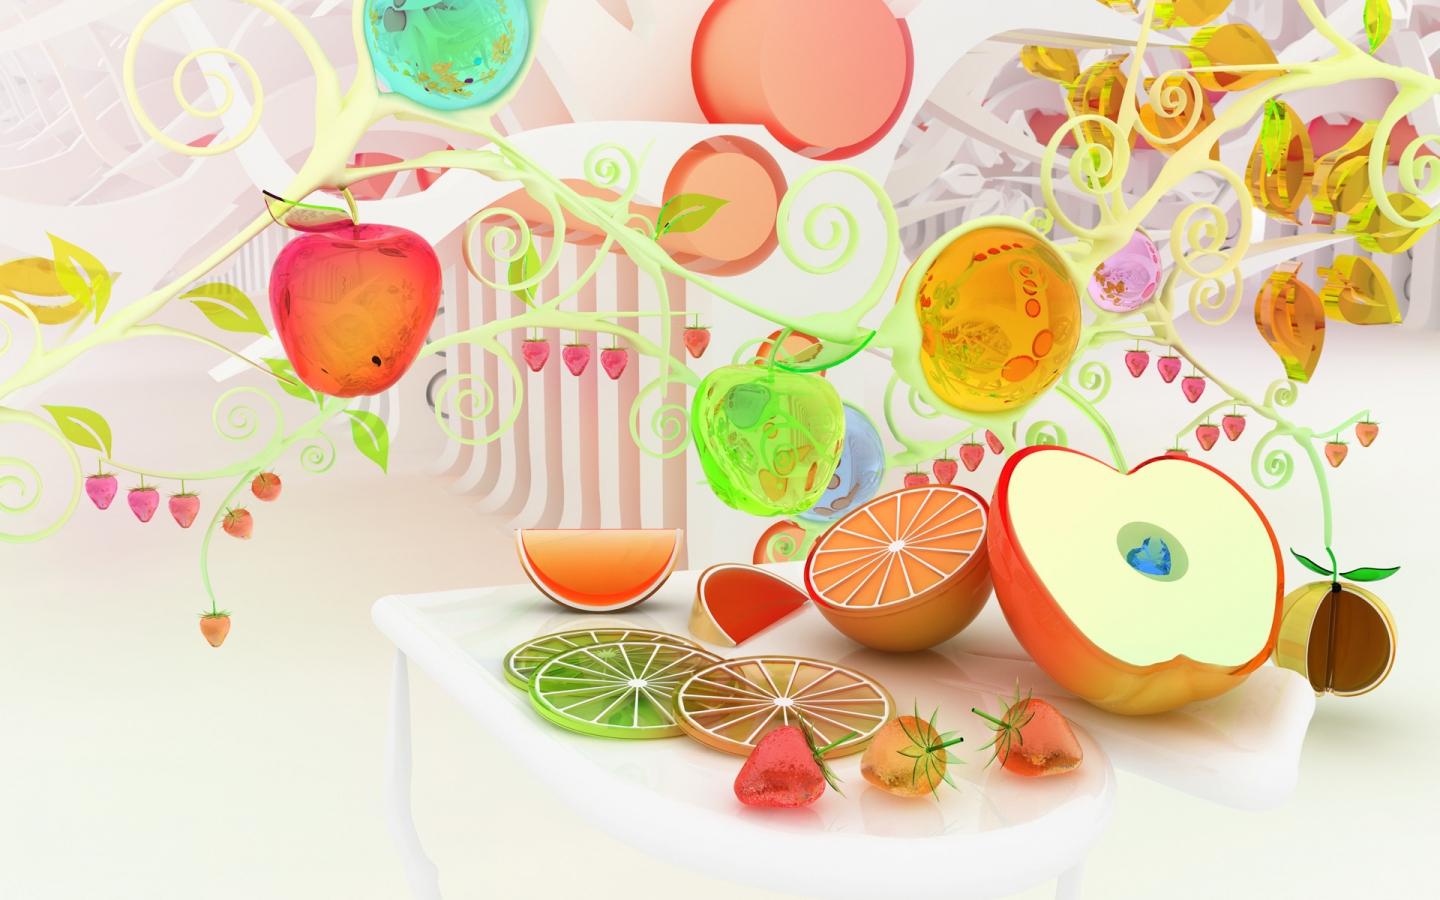 Fruits for 1440 x 900 widescreen resolution